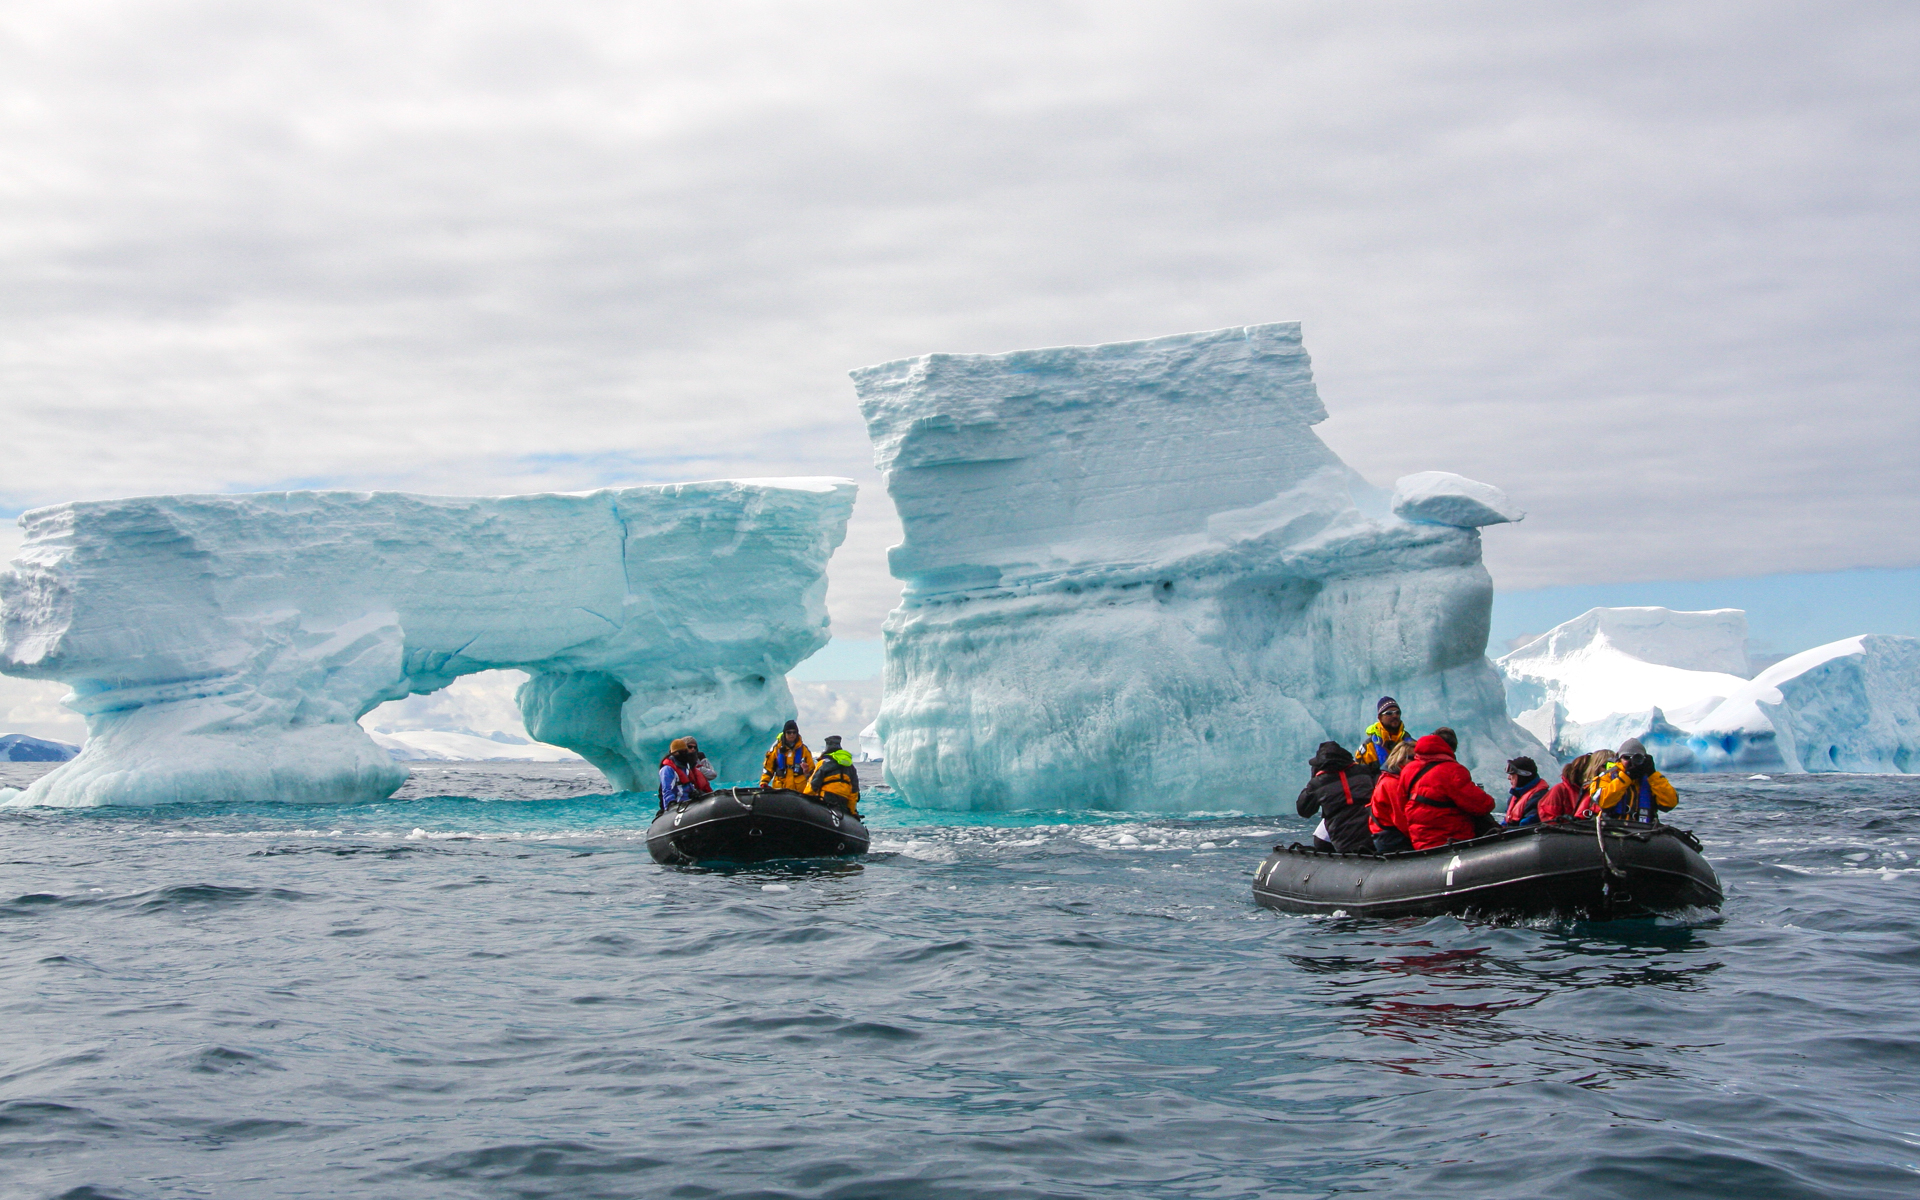 Two inflatable skiffs of travelers navigate the water while surrounded by giant teal blue and white icebergs in Antarctica